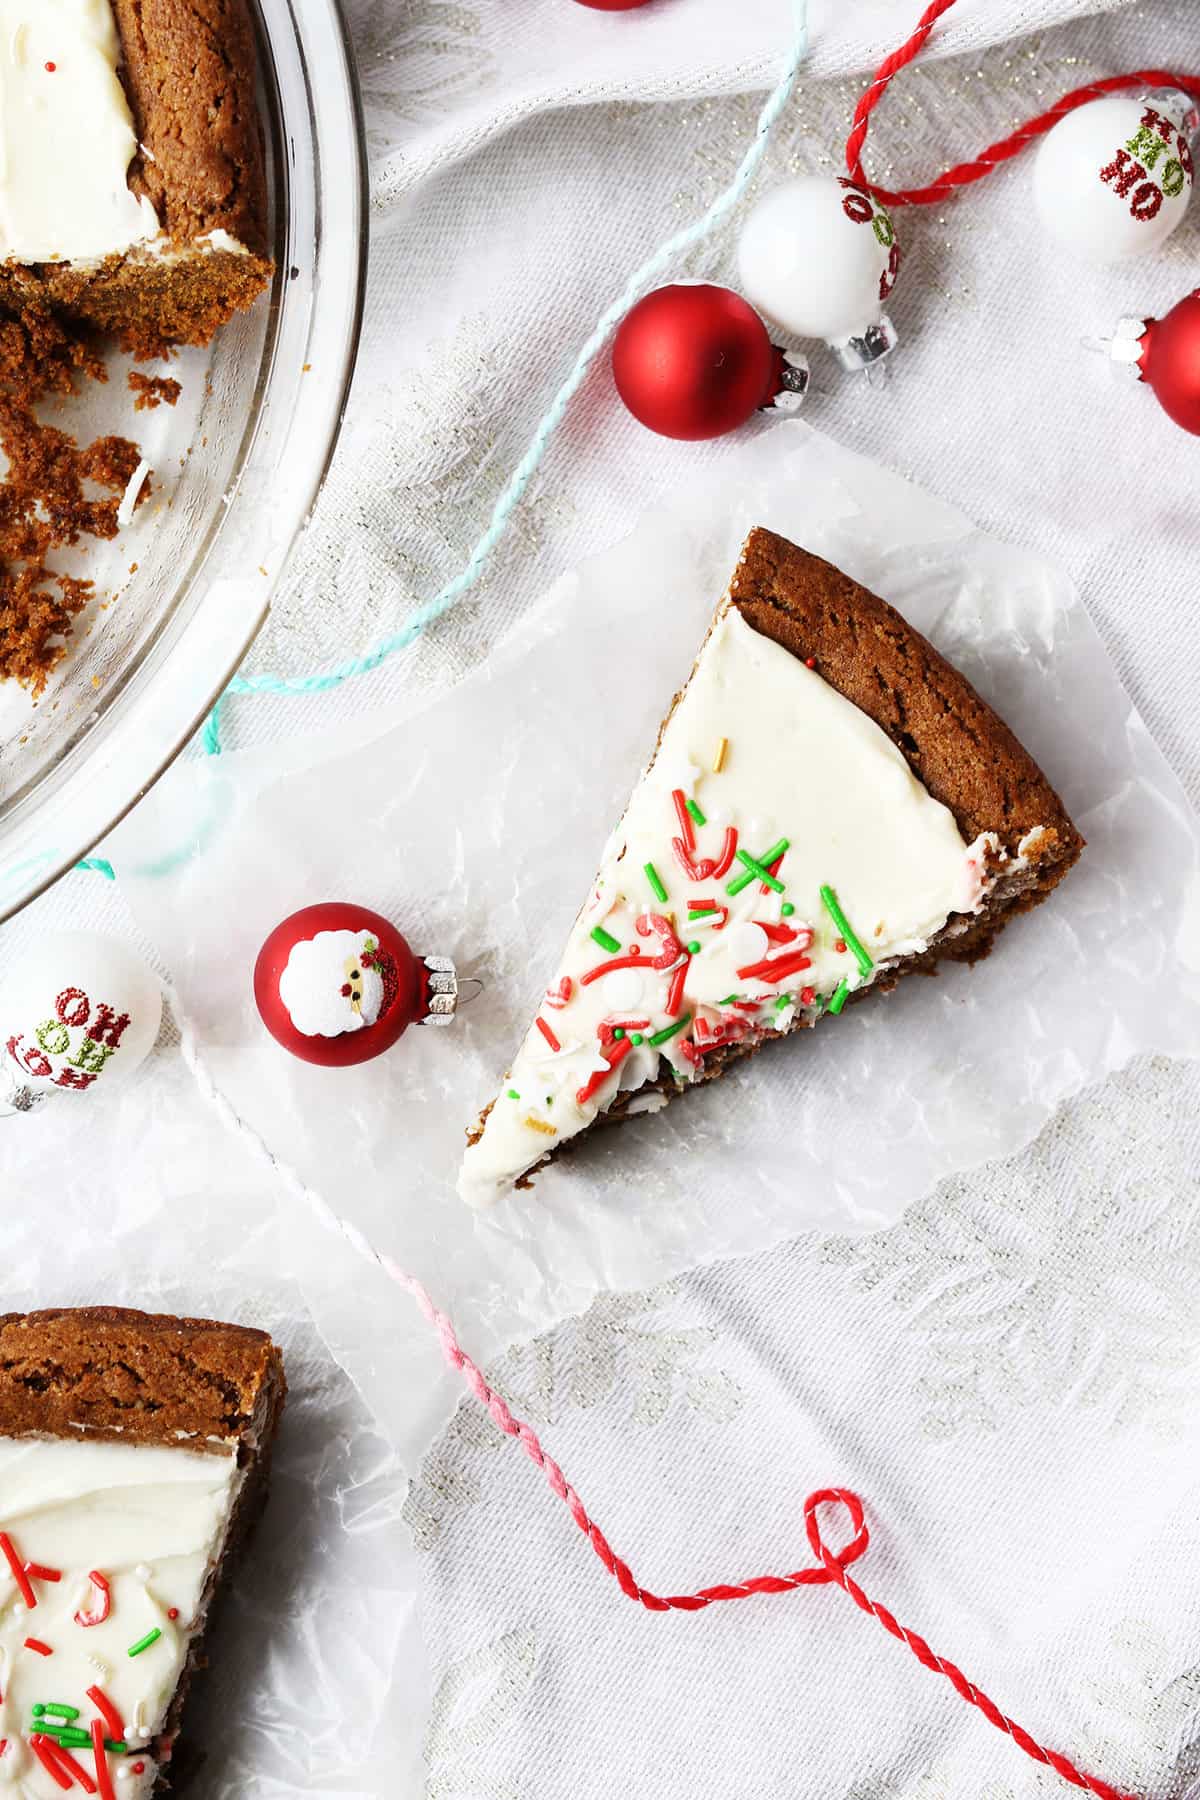 These Gingerbread Cookie Bars are soft and chewy in the center with a crispy chewy crust, vegan and only requires 1 bowl to make!